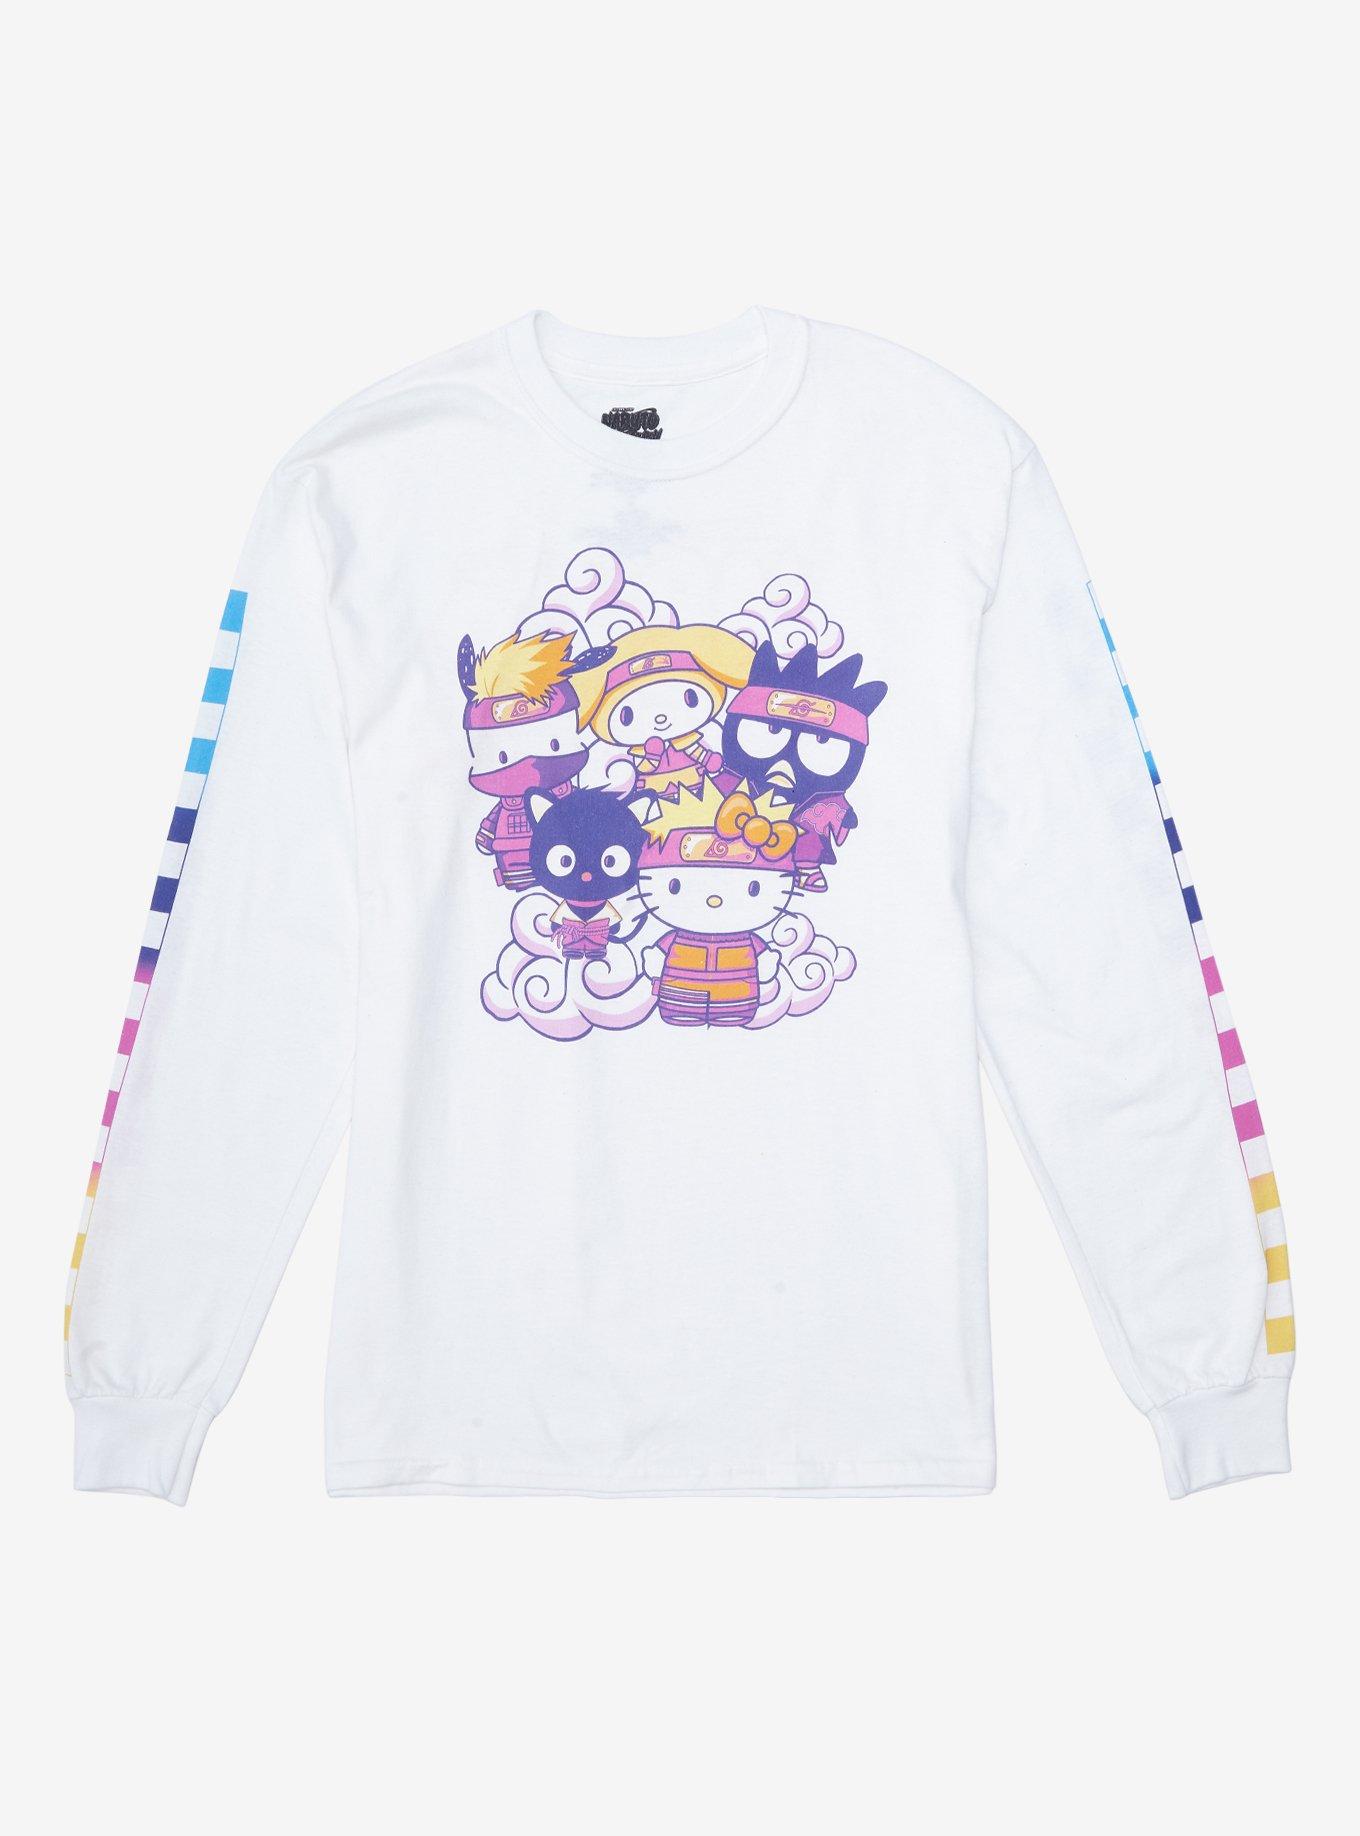 Naruto Shippuden X Hello Kitty And Friends Group Checkered Girls Long-Sleeve T-Shirt Plus Size, MULTI, hi-res